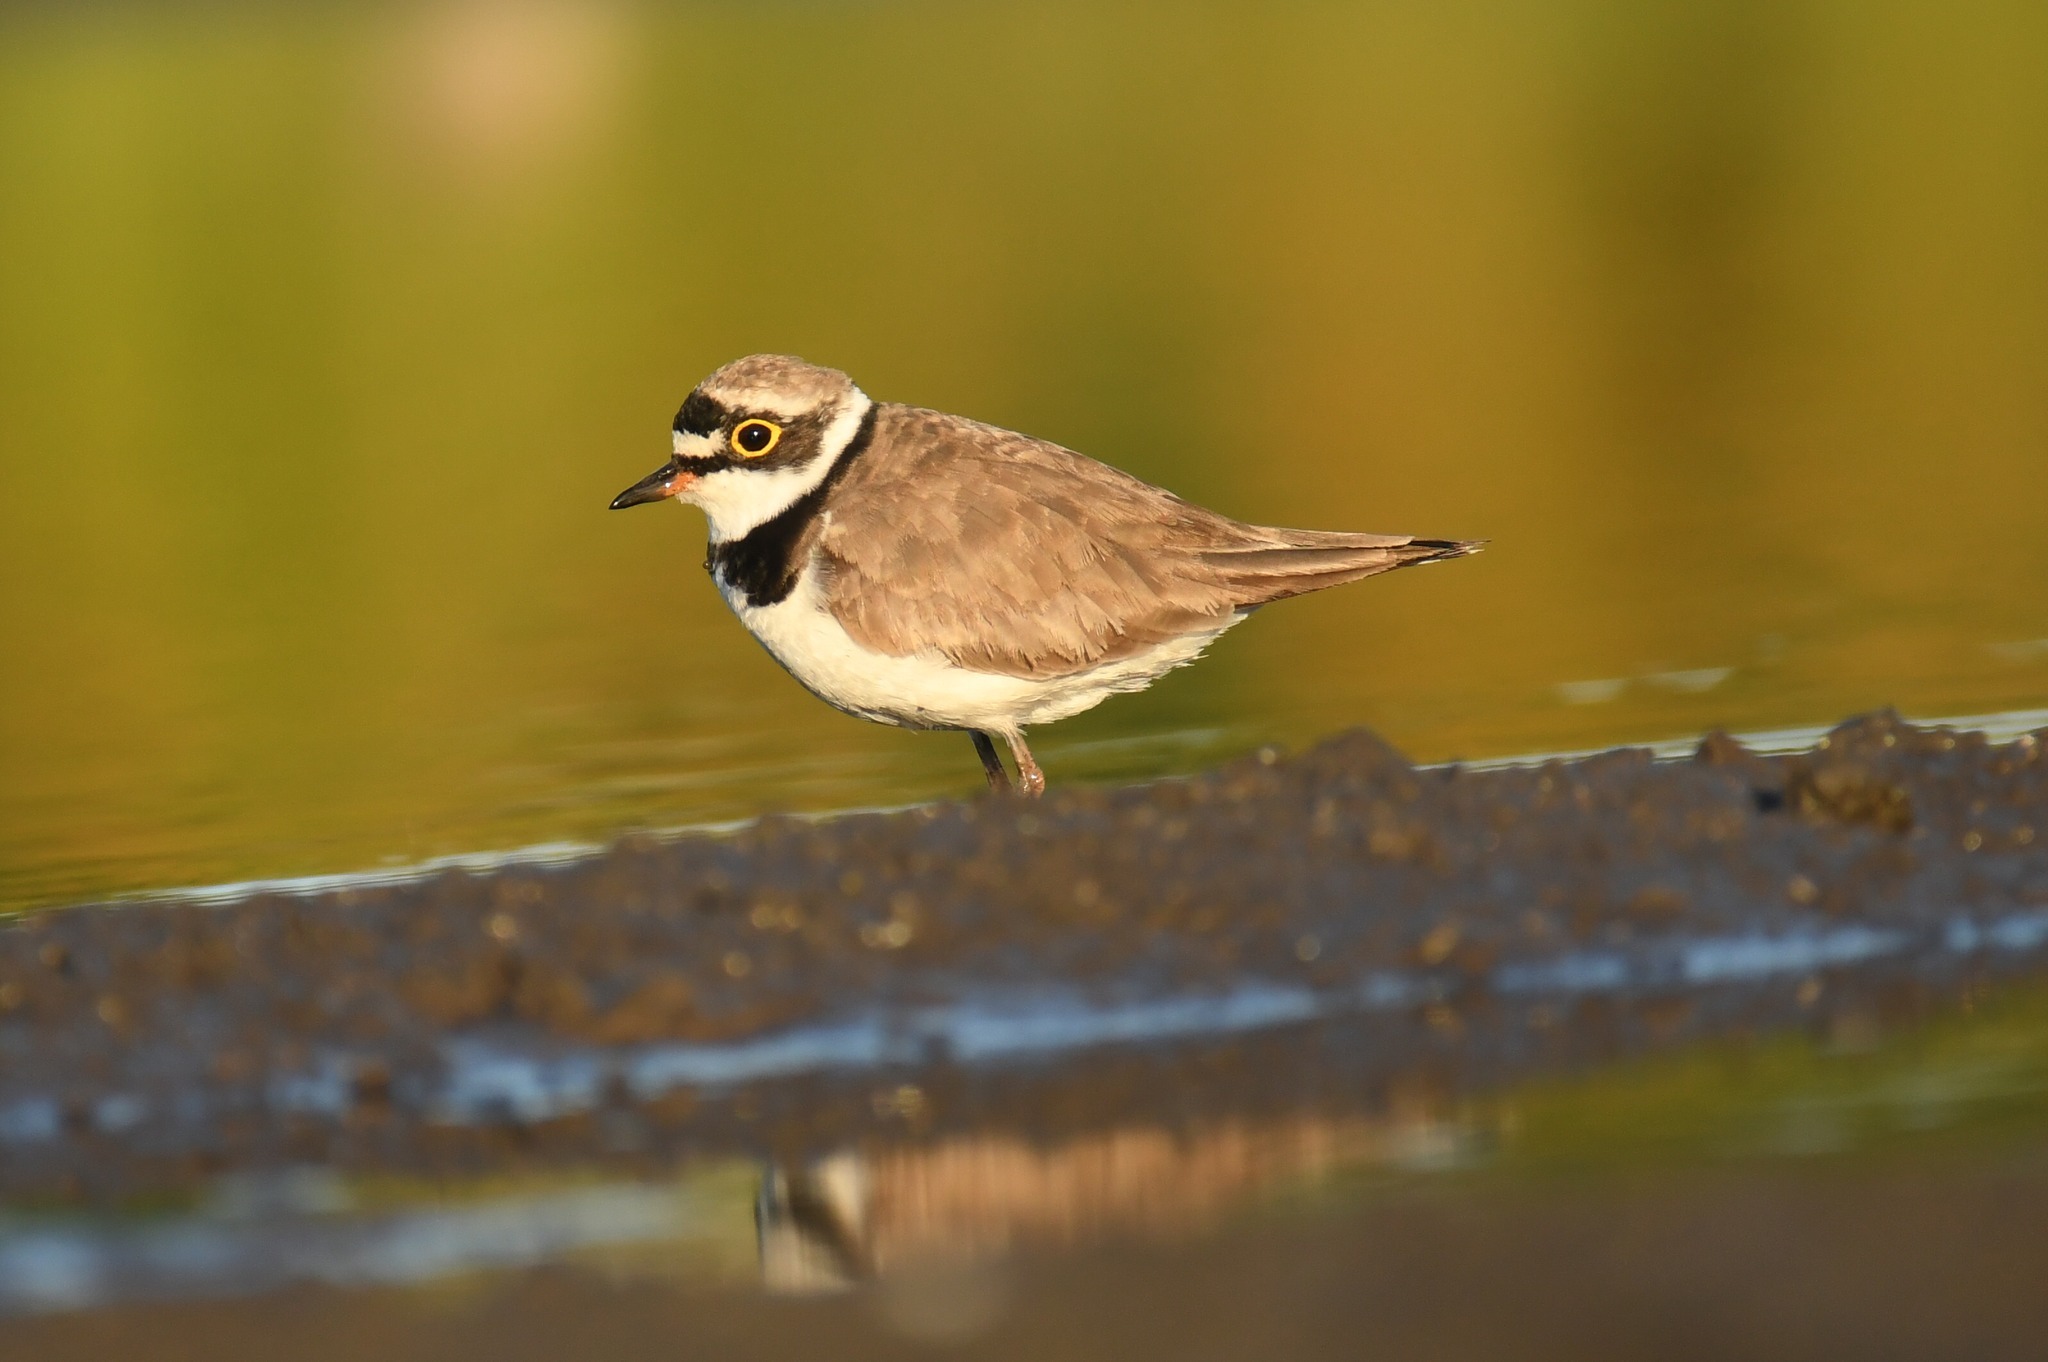 A little ringed Plover in Winsford by Paul Wright